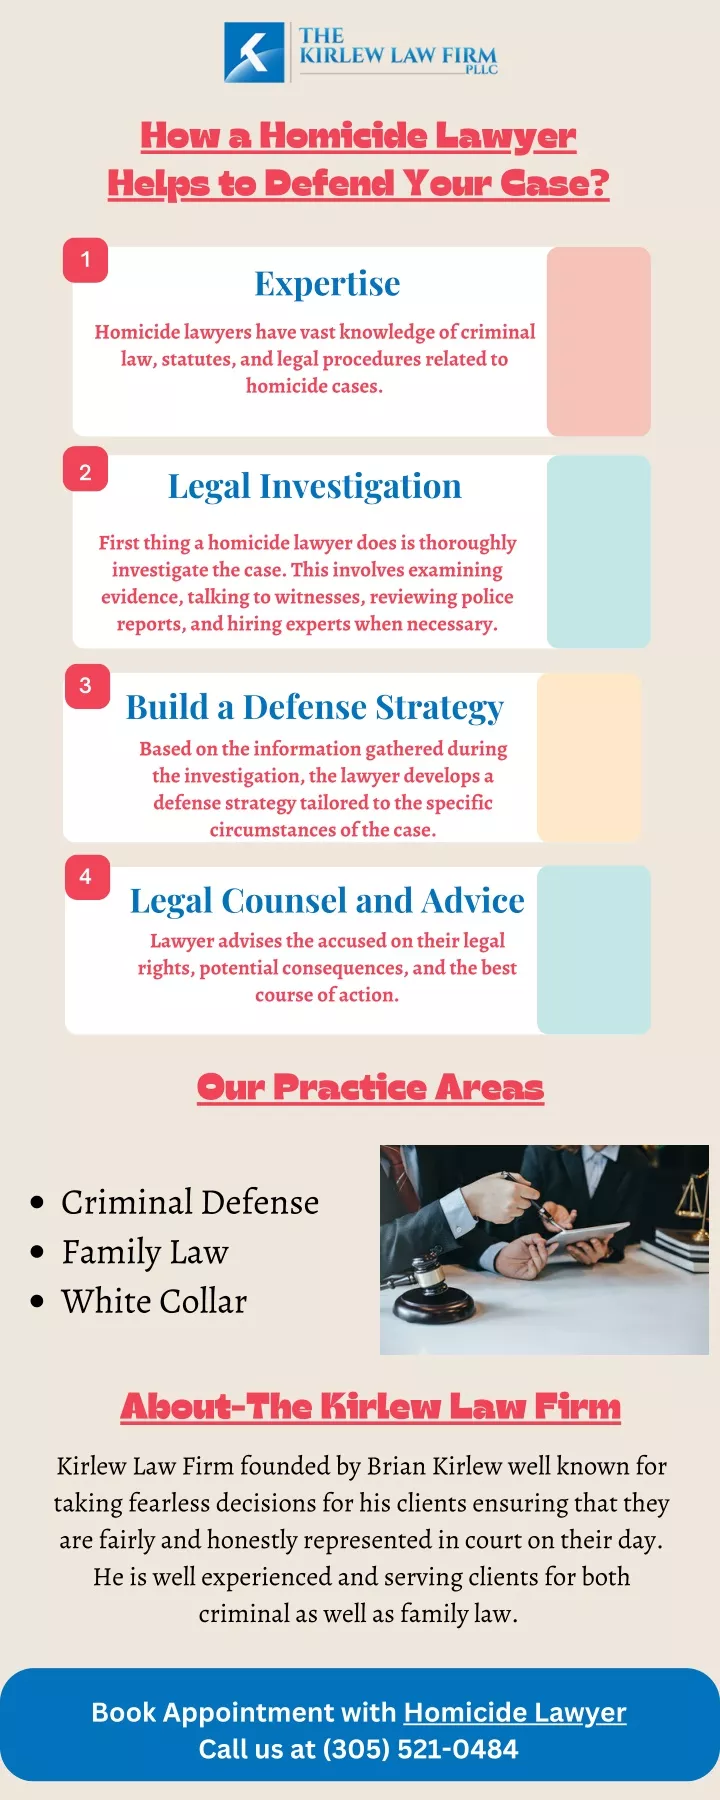 how a homicide lawyer helps to defend your case